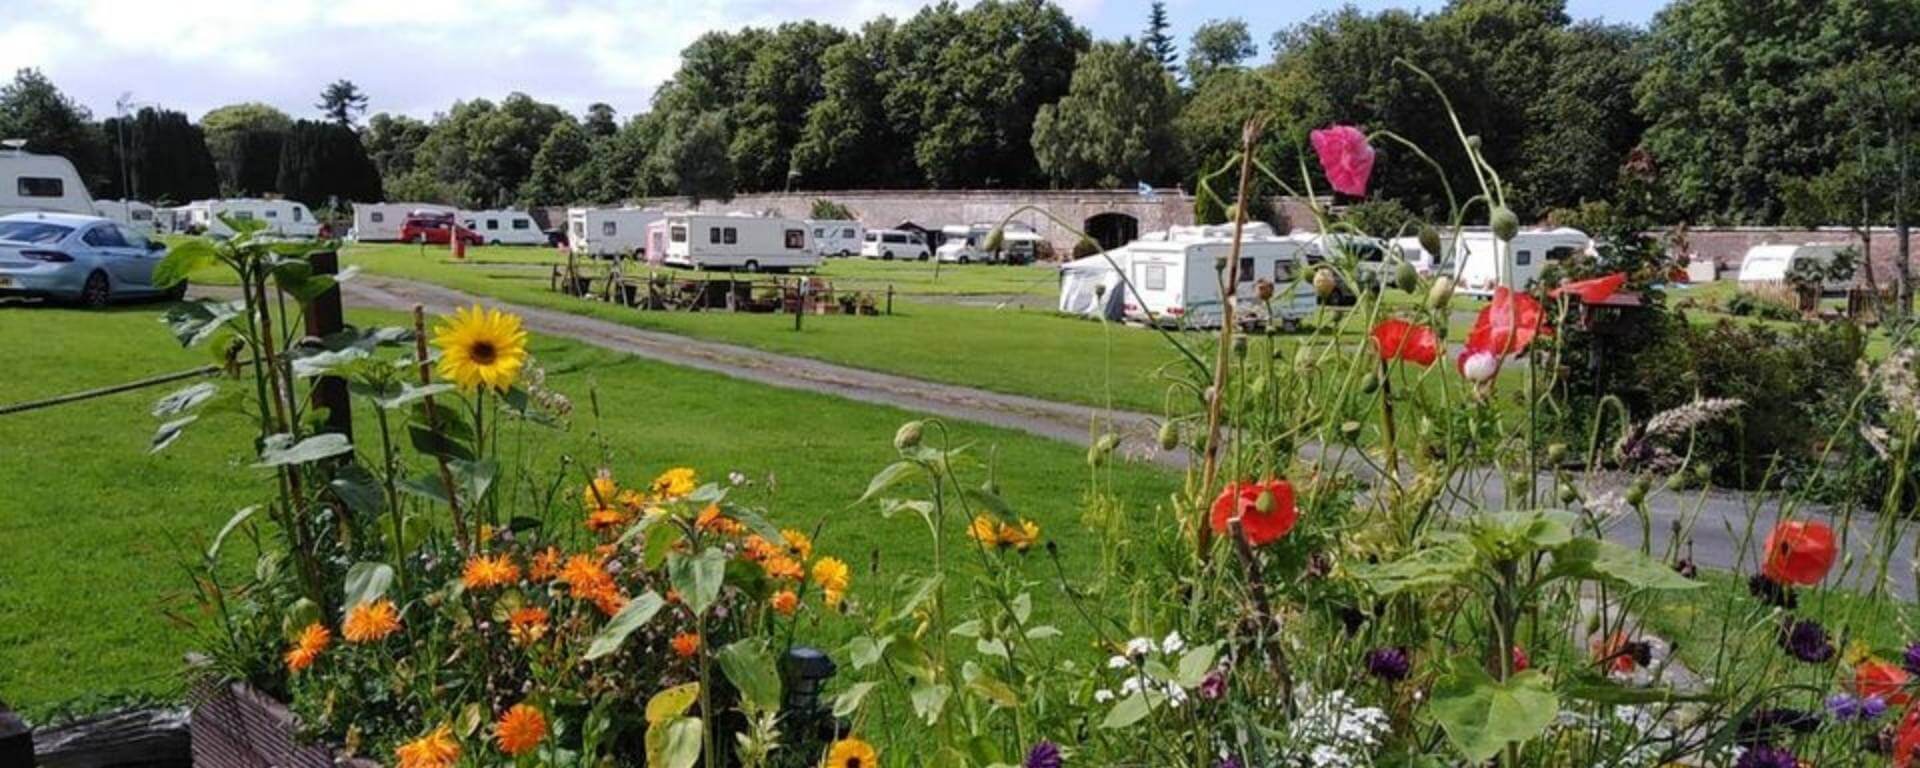 Summer flowers and caravans in the background.